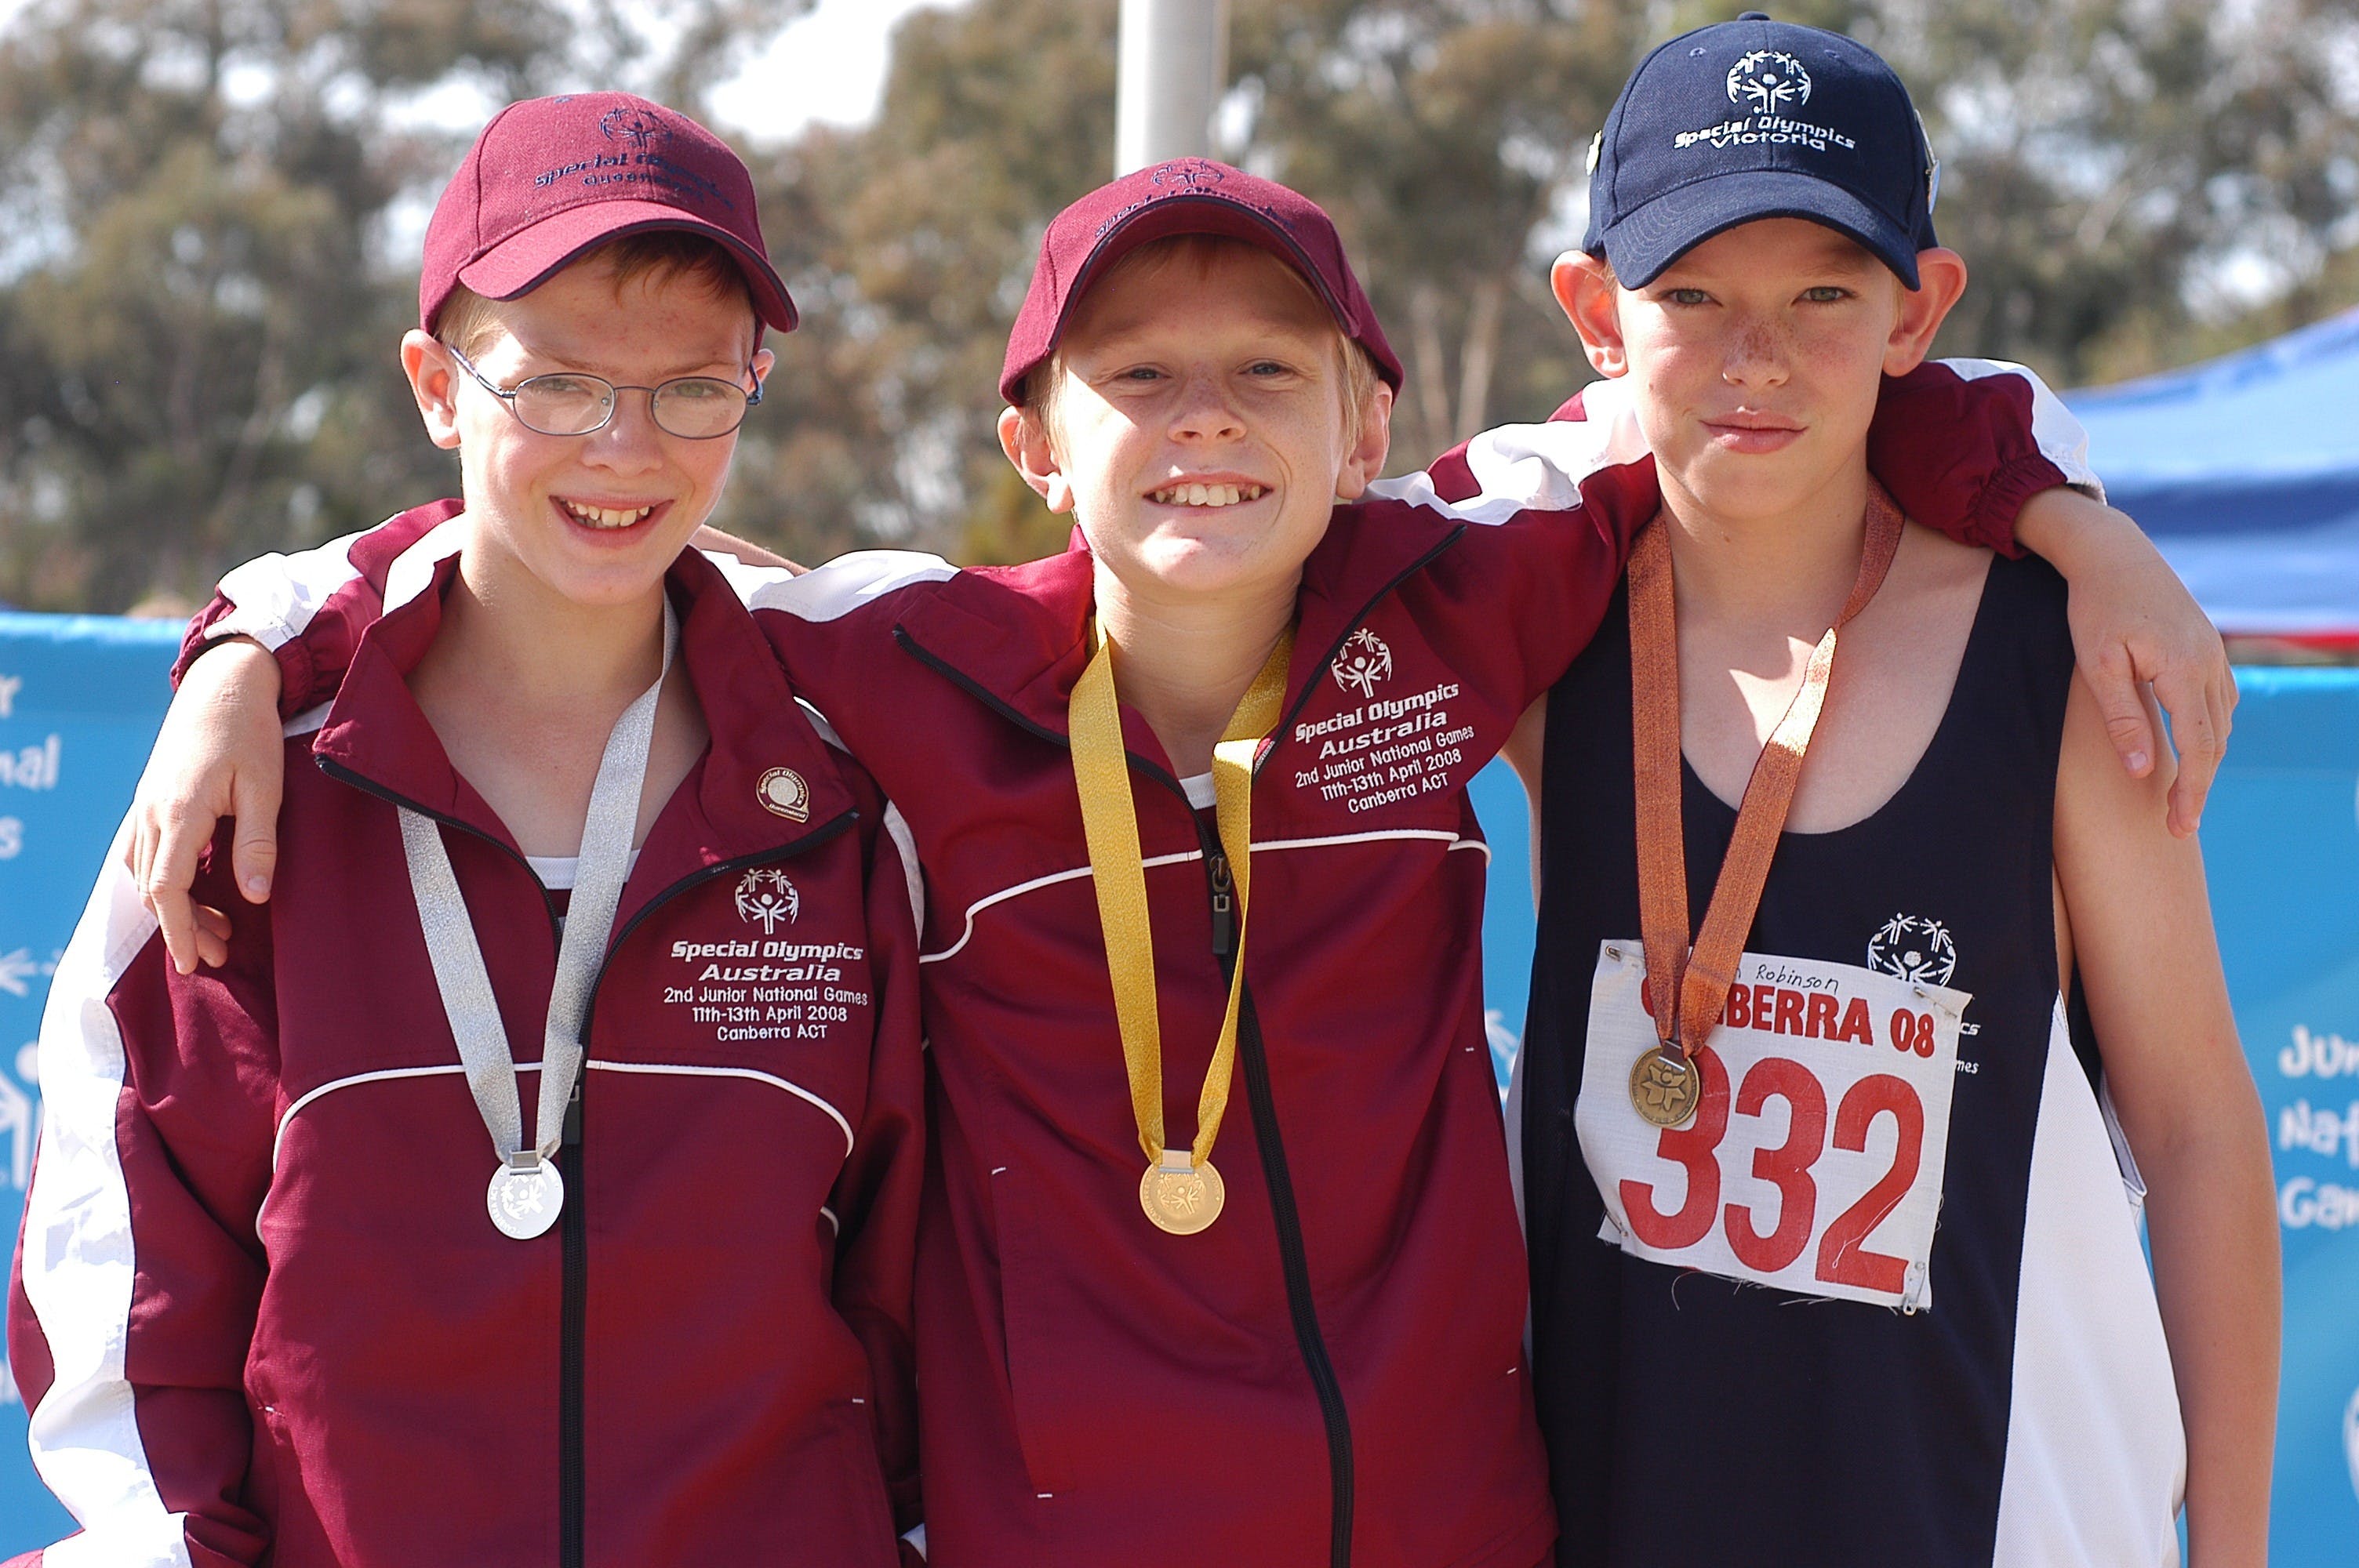 Special Olympics Australia Junior National Games 2021 - Pubs and Clubs